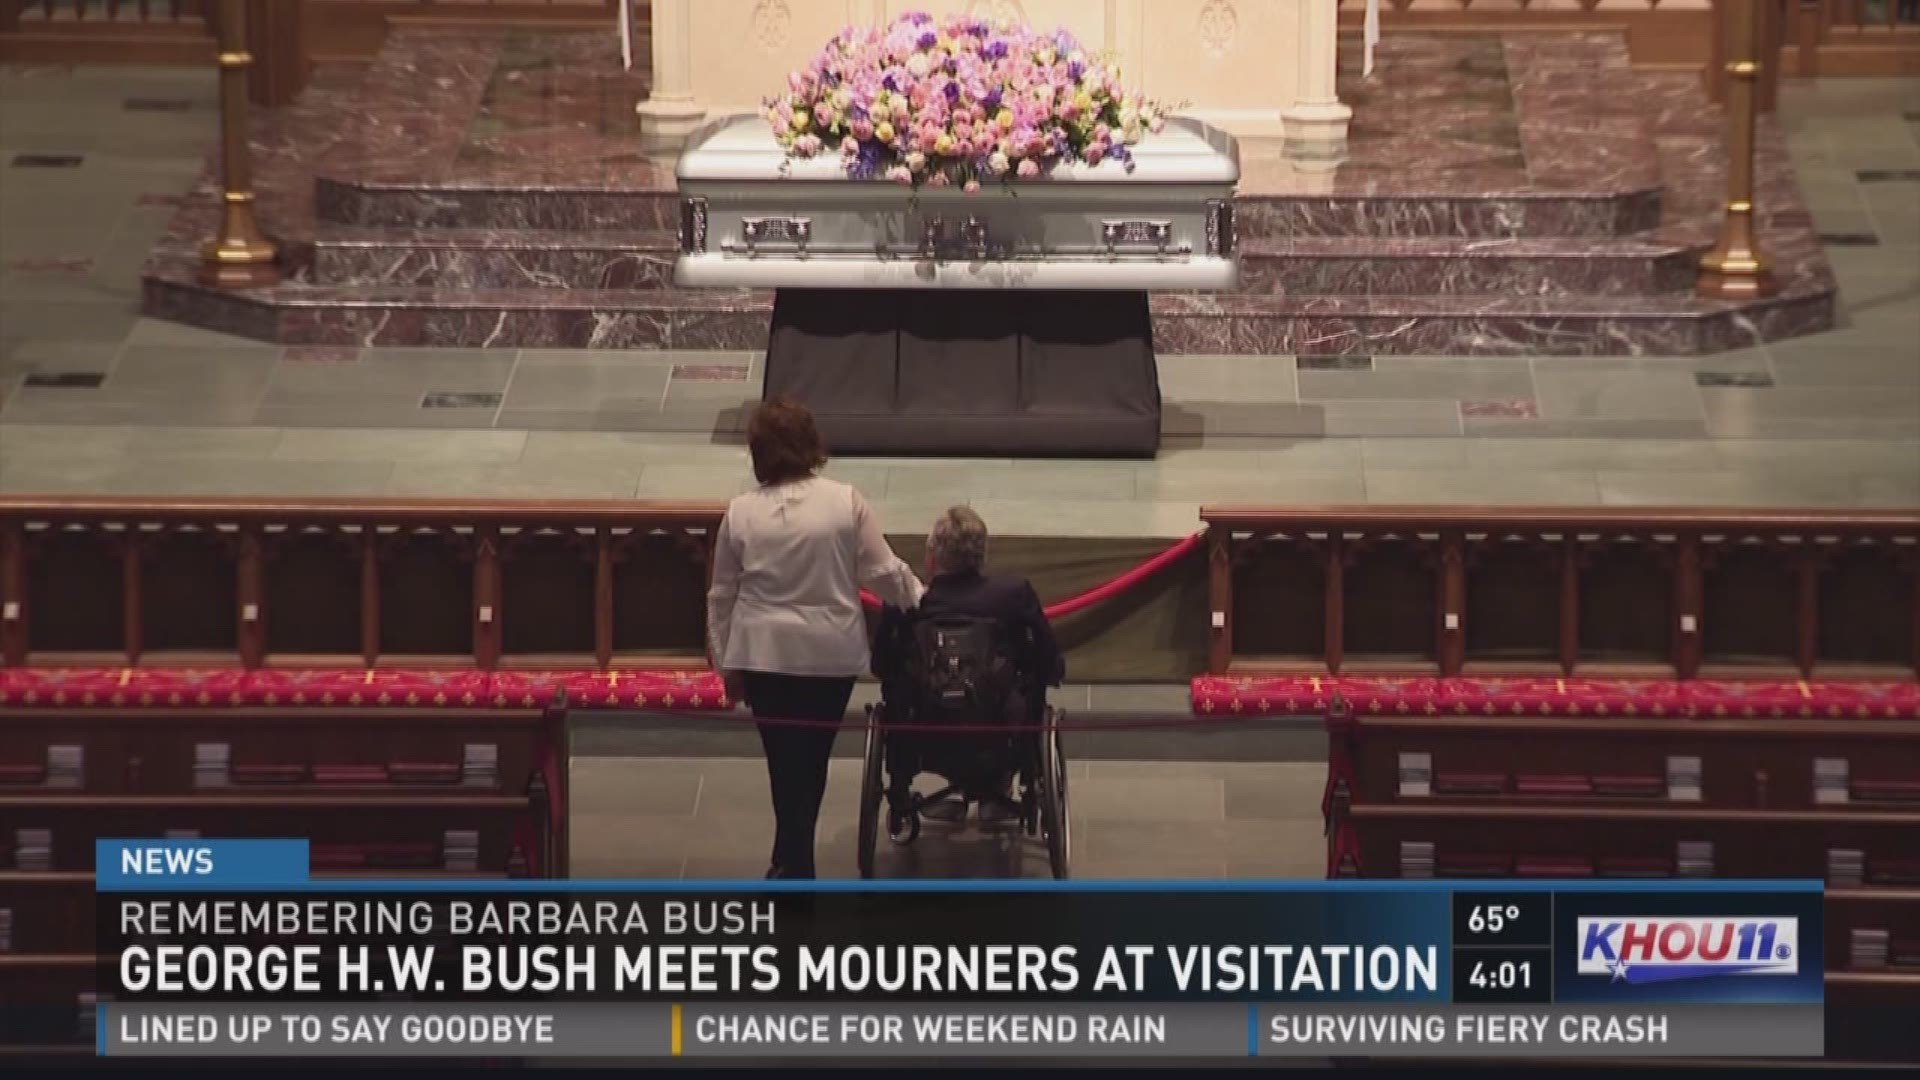 President George H.W. Bush greeted people who paid their respects to Barbara Bush at her visitation Friday.